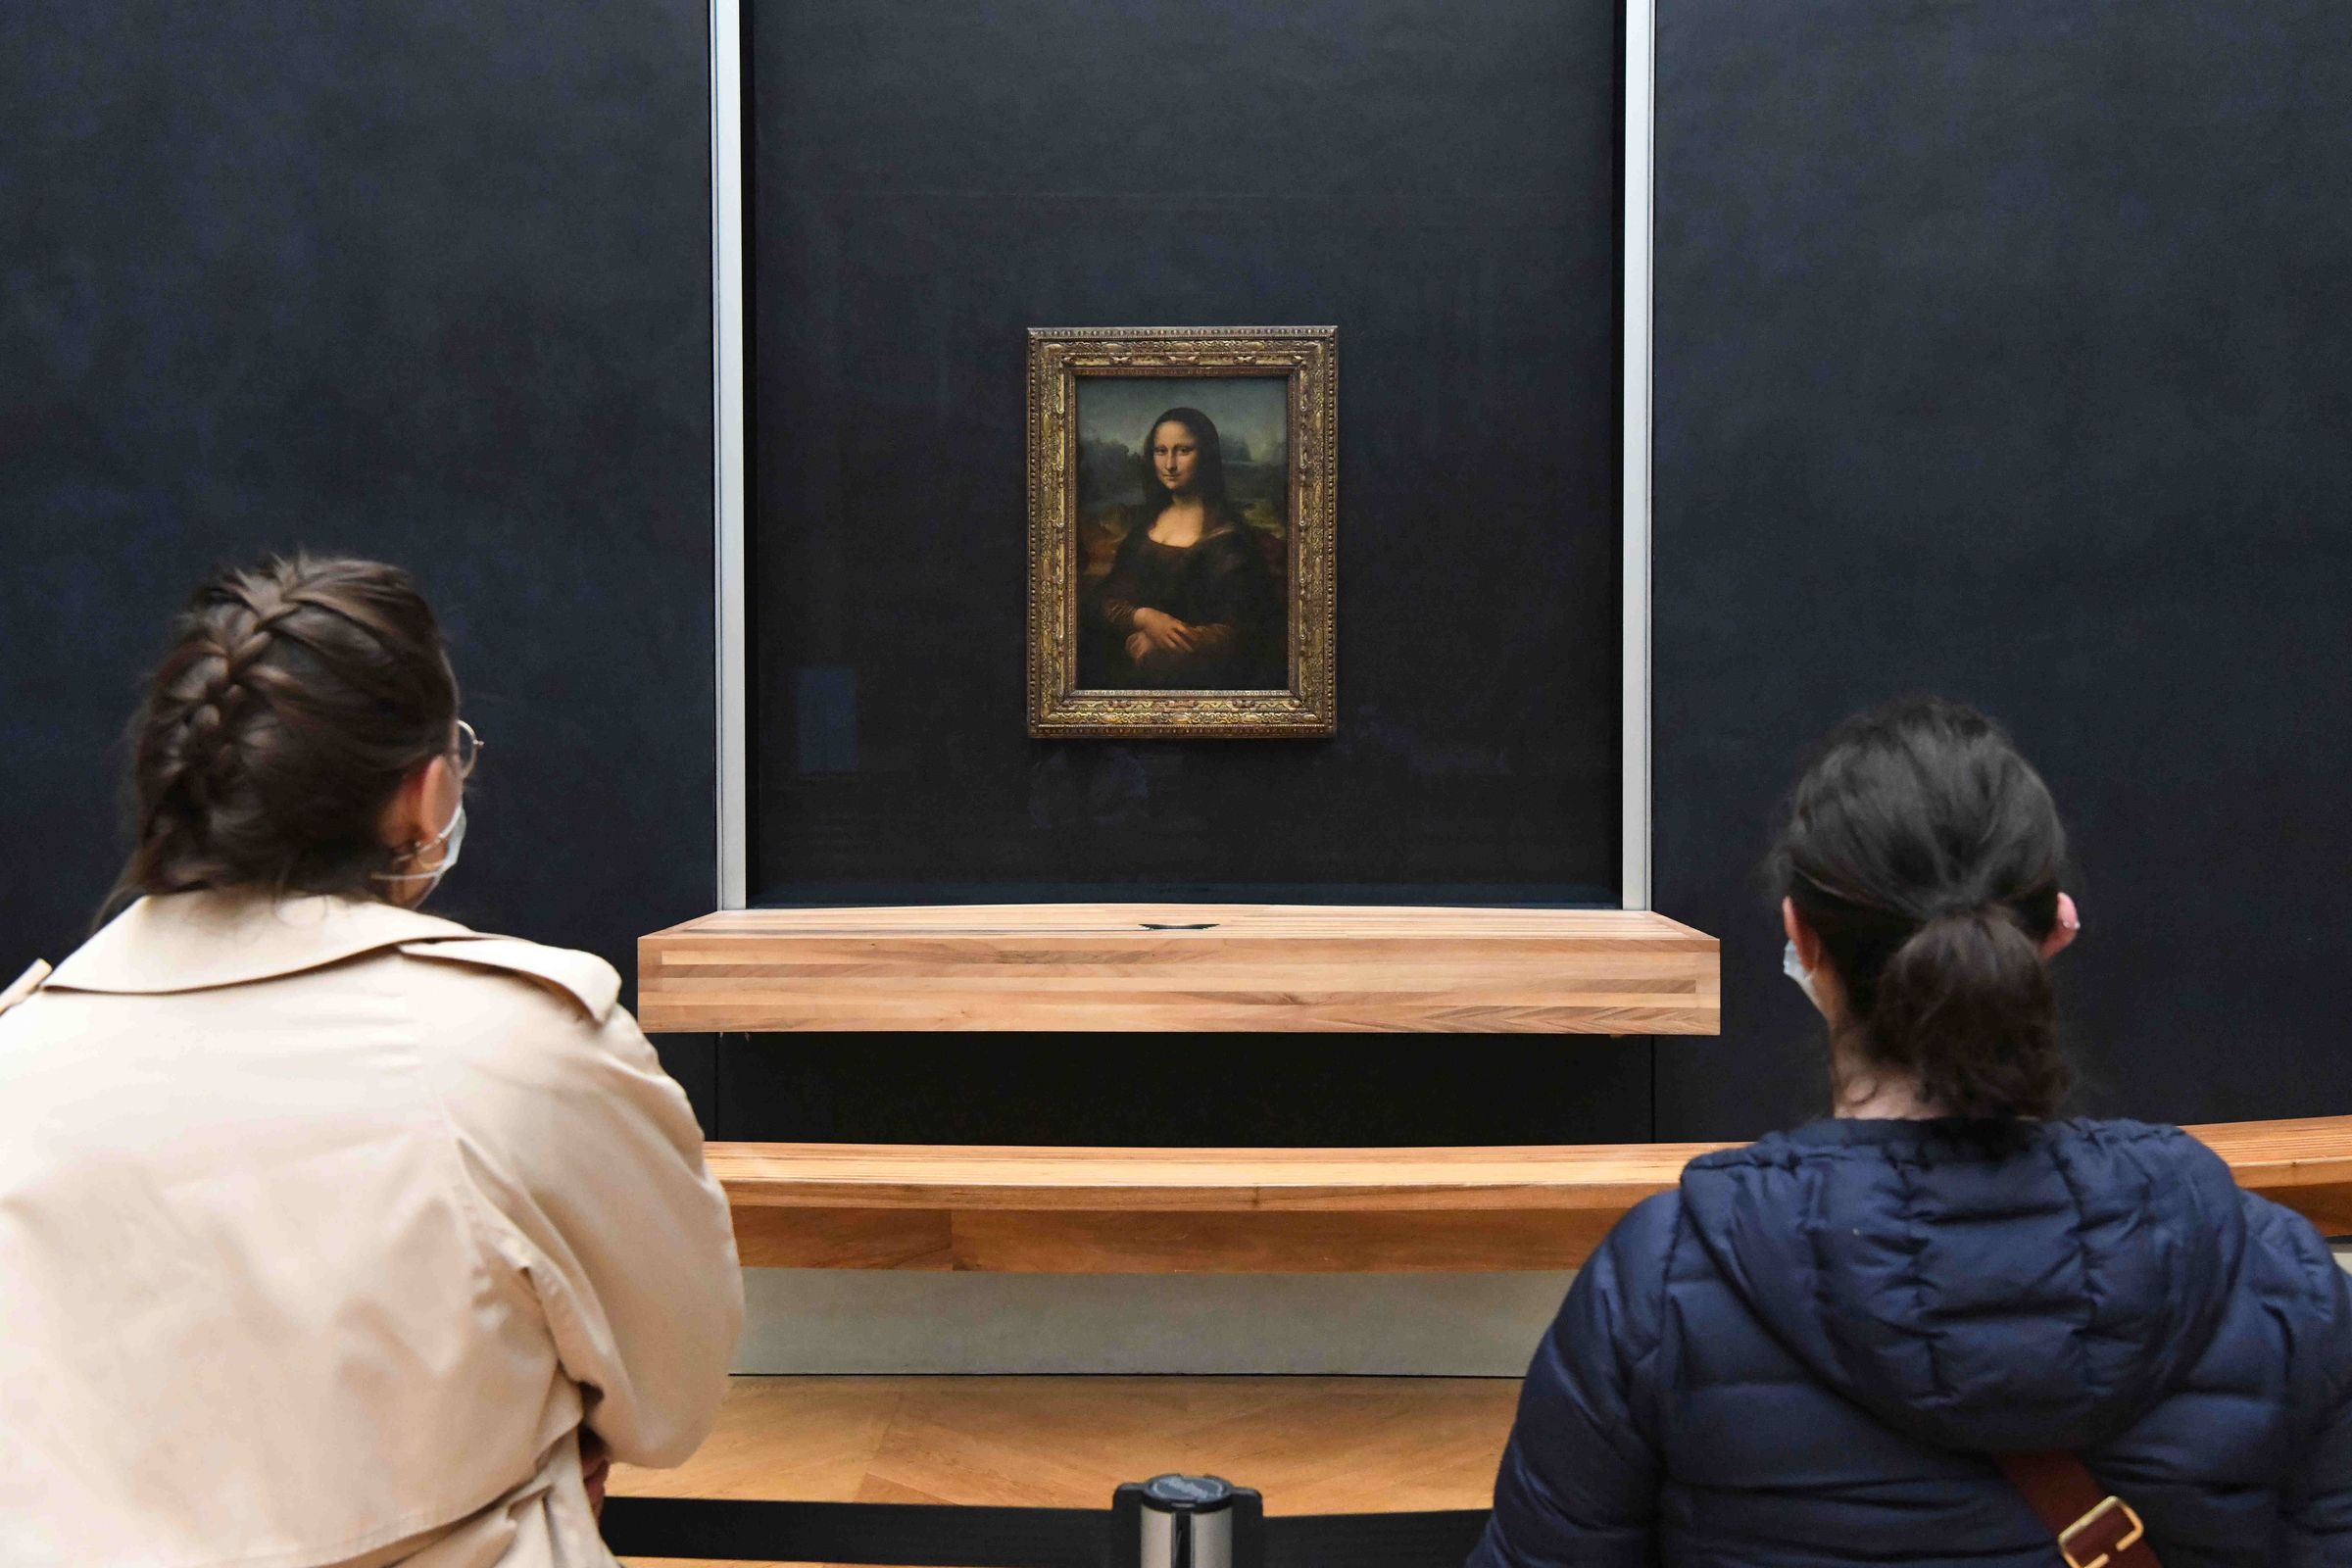 Two people viewing the Mona Lisa